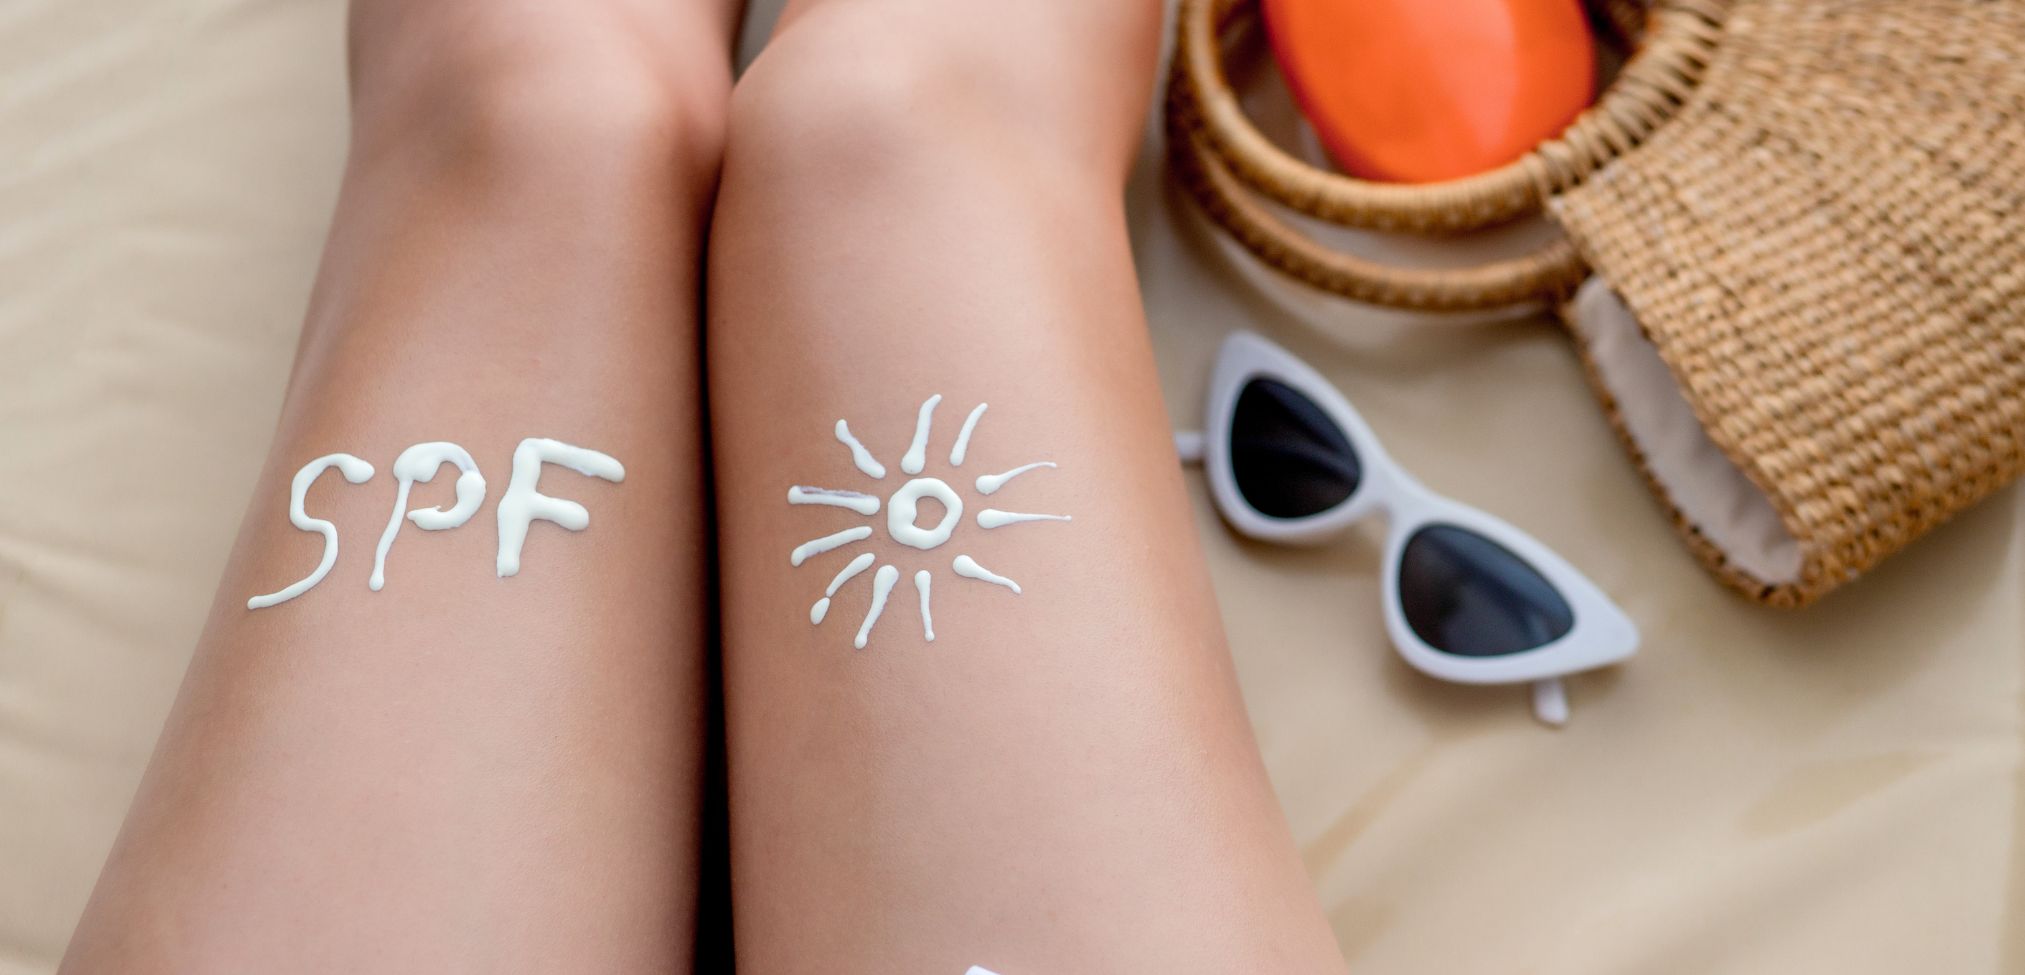 spf stands for sun protection factor